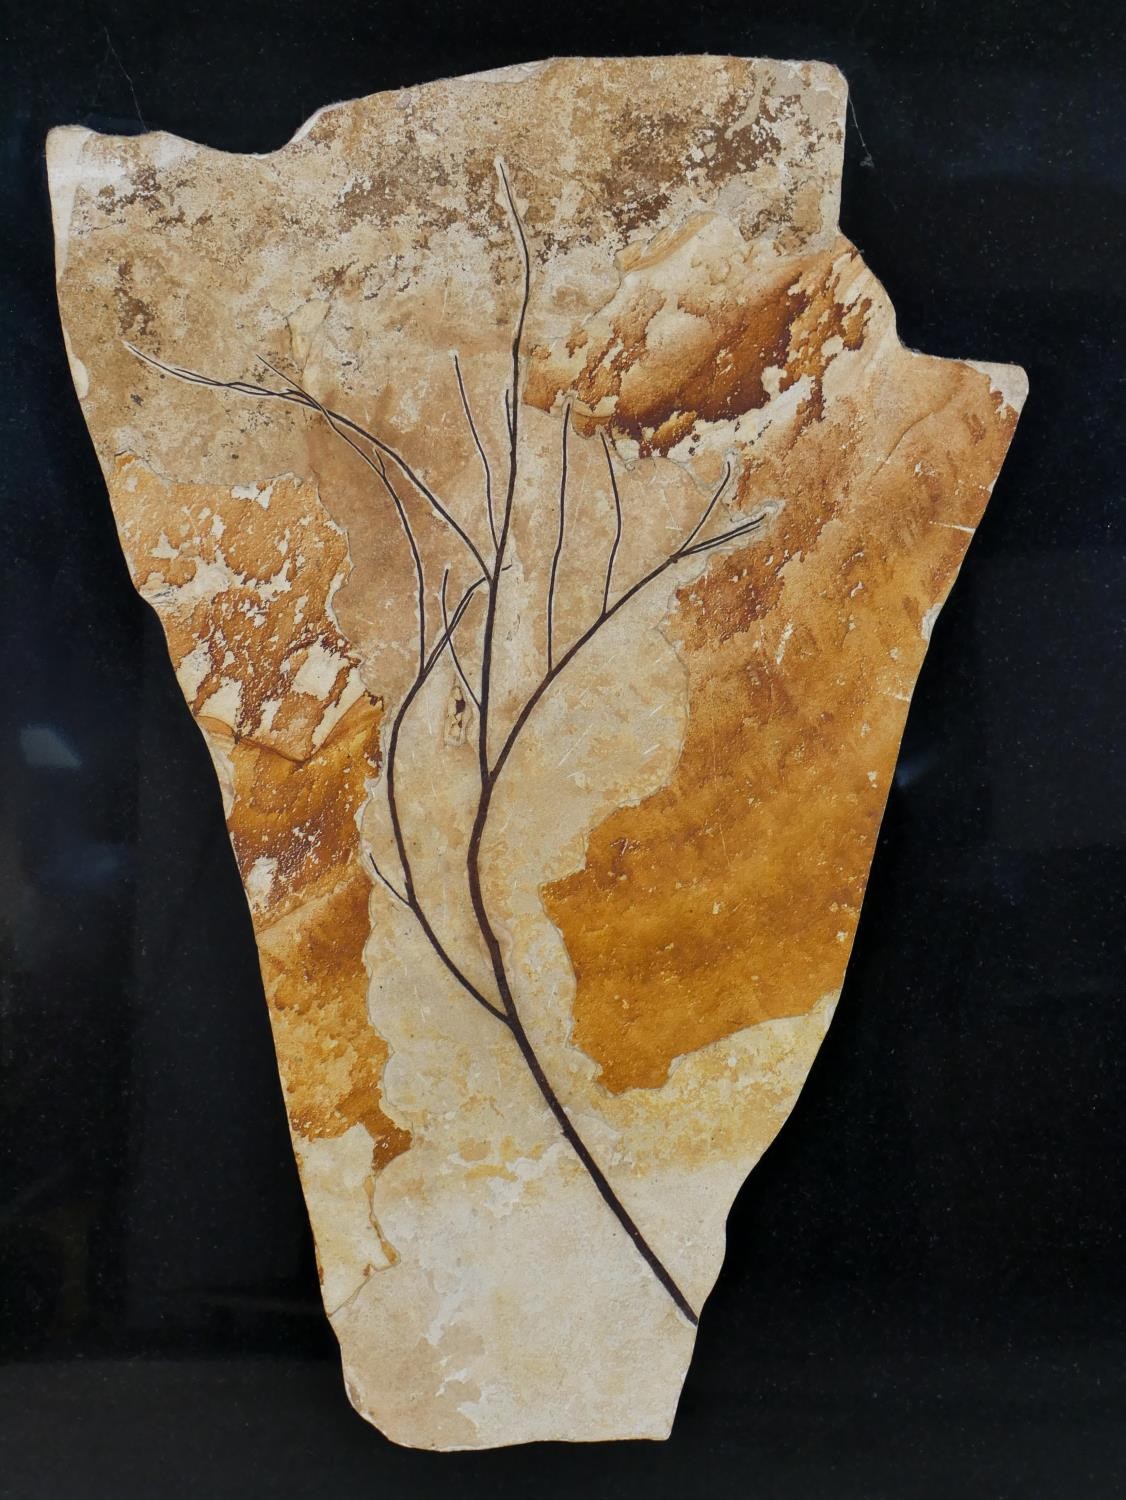 A Miocene period (20 million years) mounted fossil from a branch of a tree from Wyoming, with marble